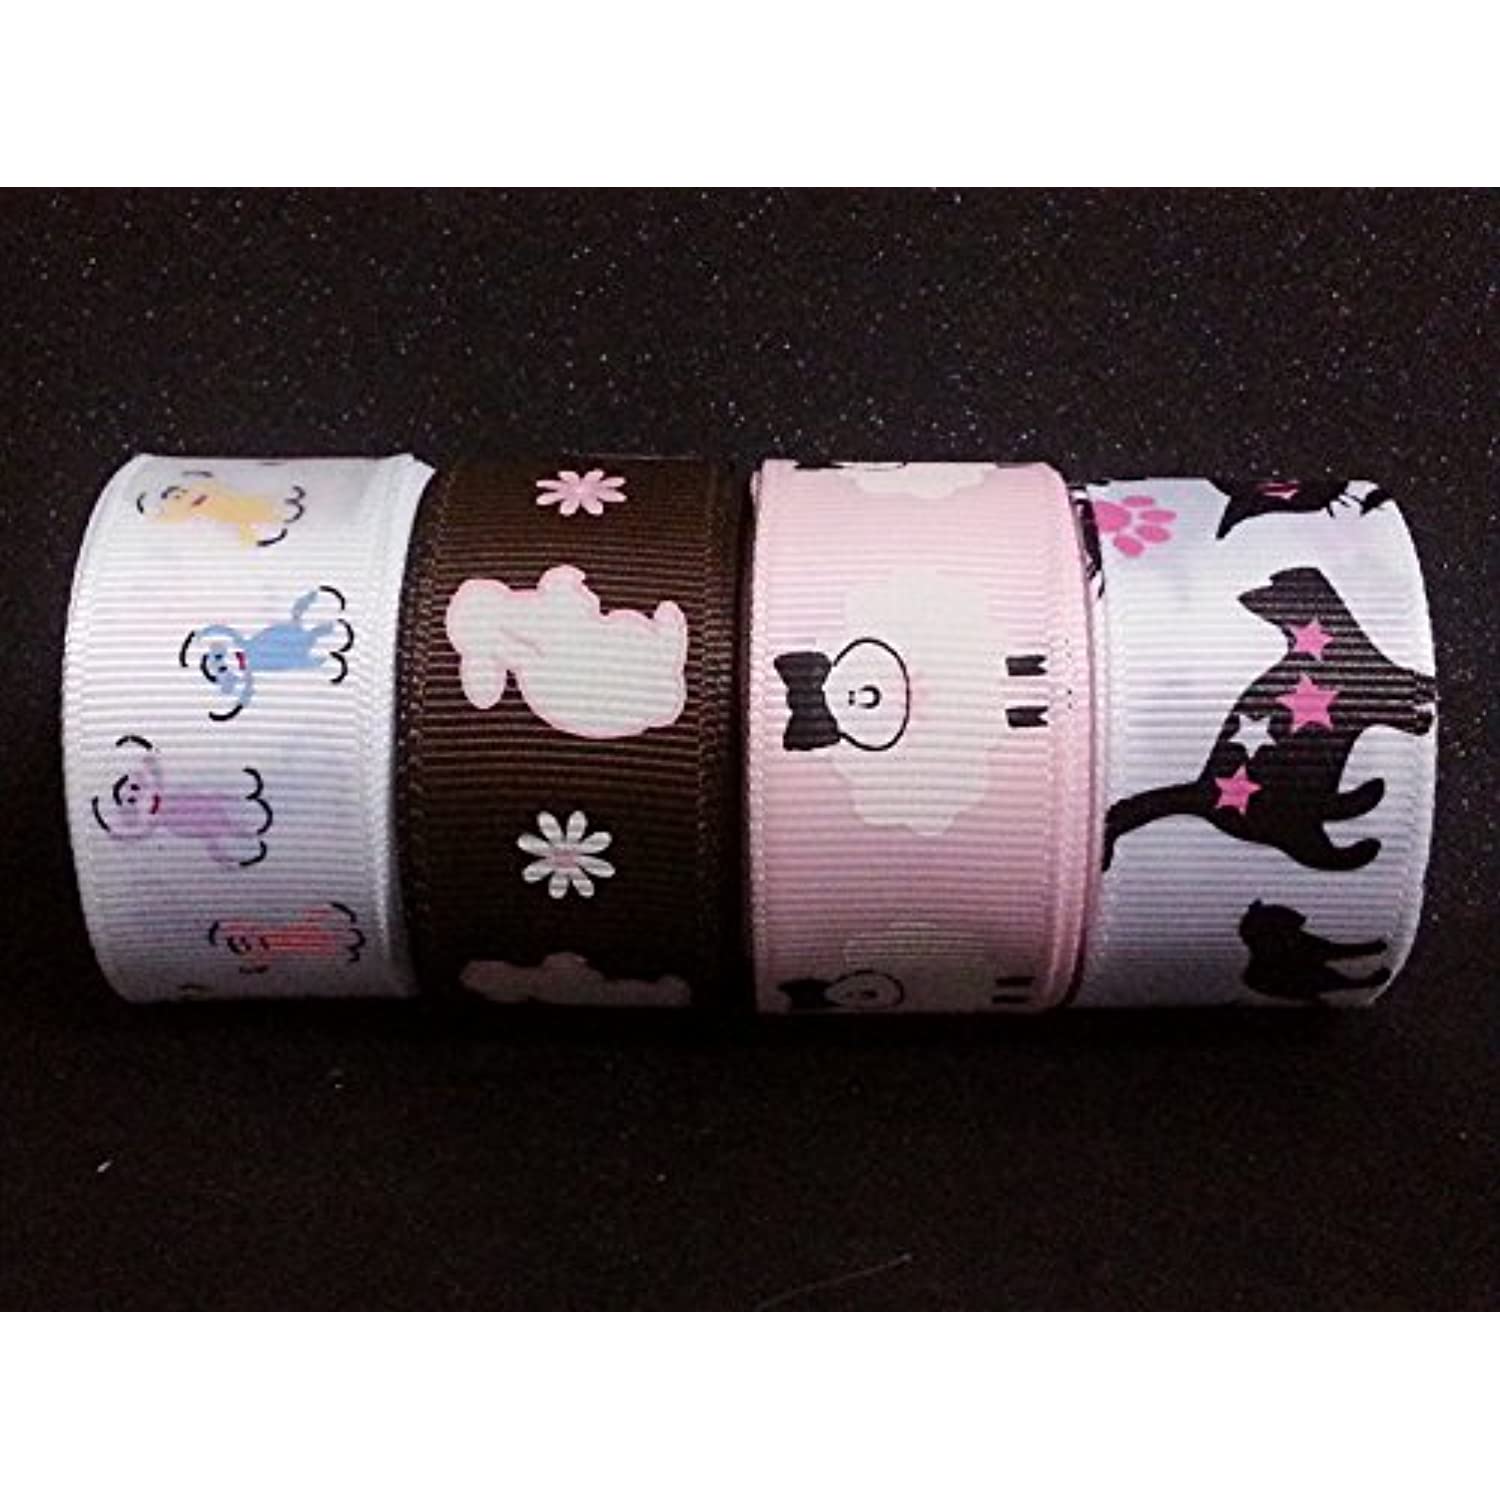 Polyester Grosgrain Ribbon for Decorations, Hairbows & Gift Wrap by Yame Home (7/8-in by 10-yds, 00025401 - white sheep w/ light pink background)